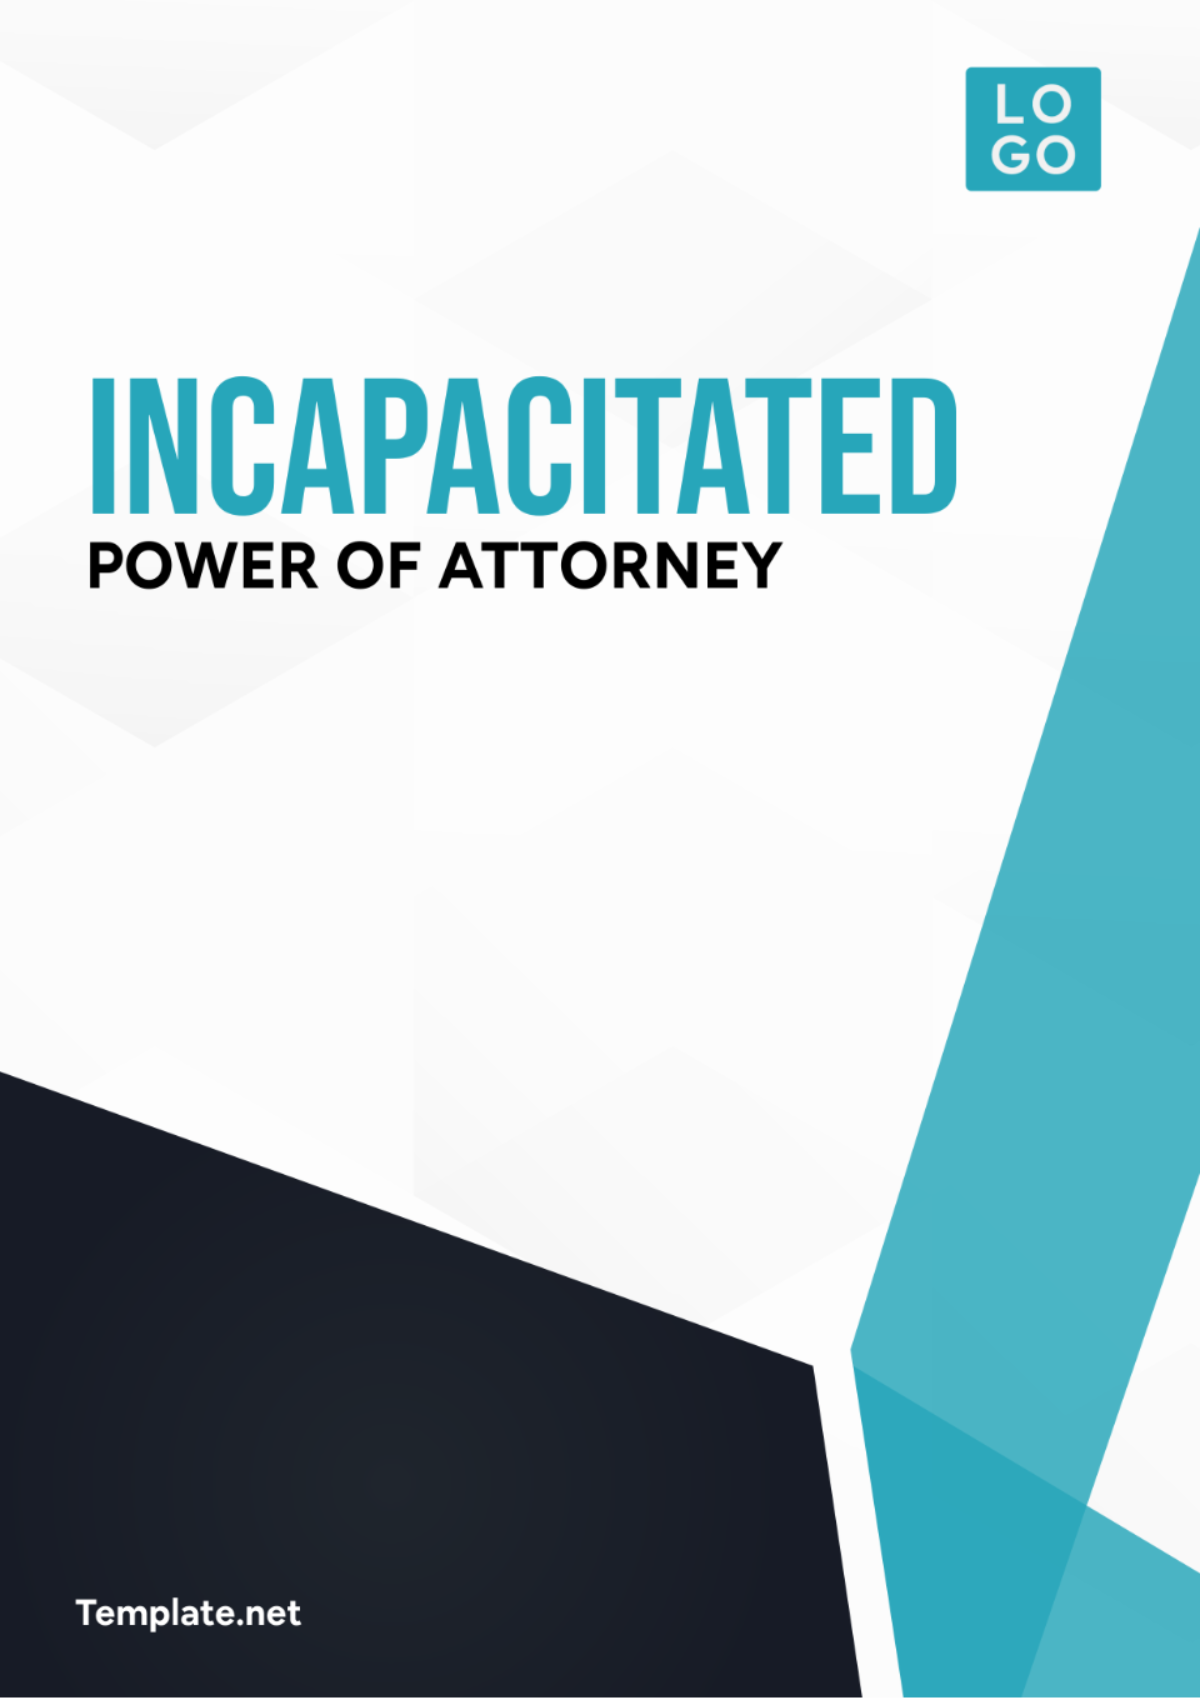 Incapacitated Power of Attorney Template